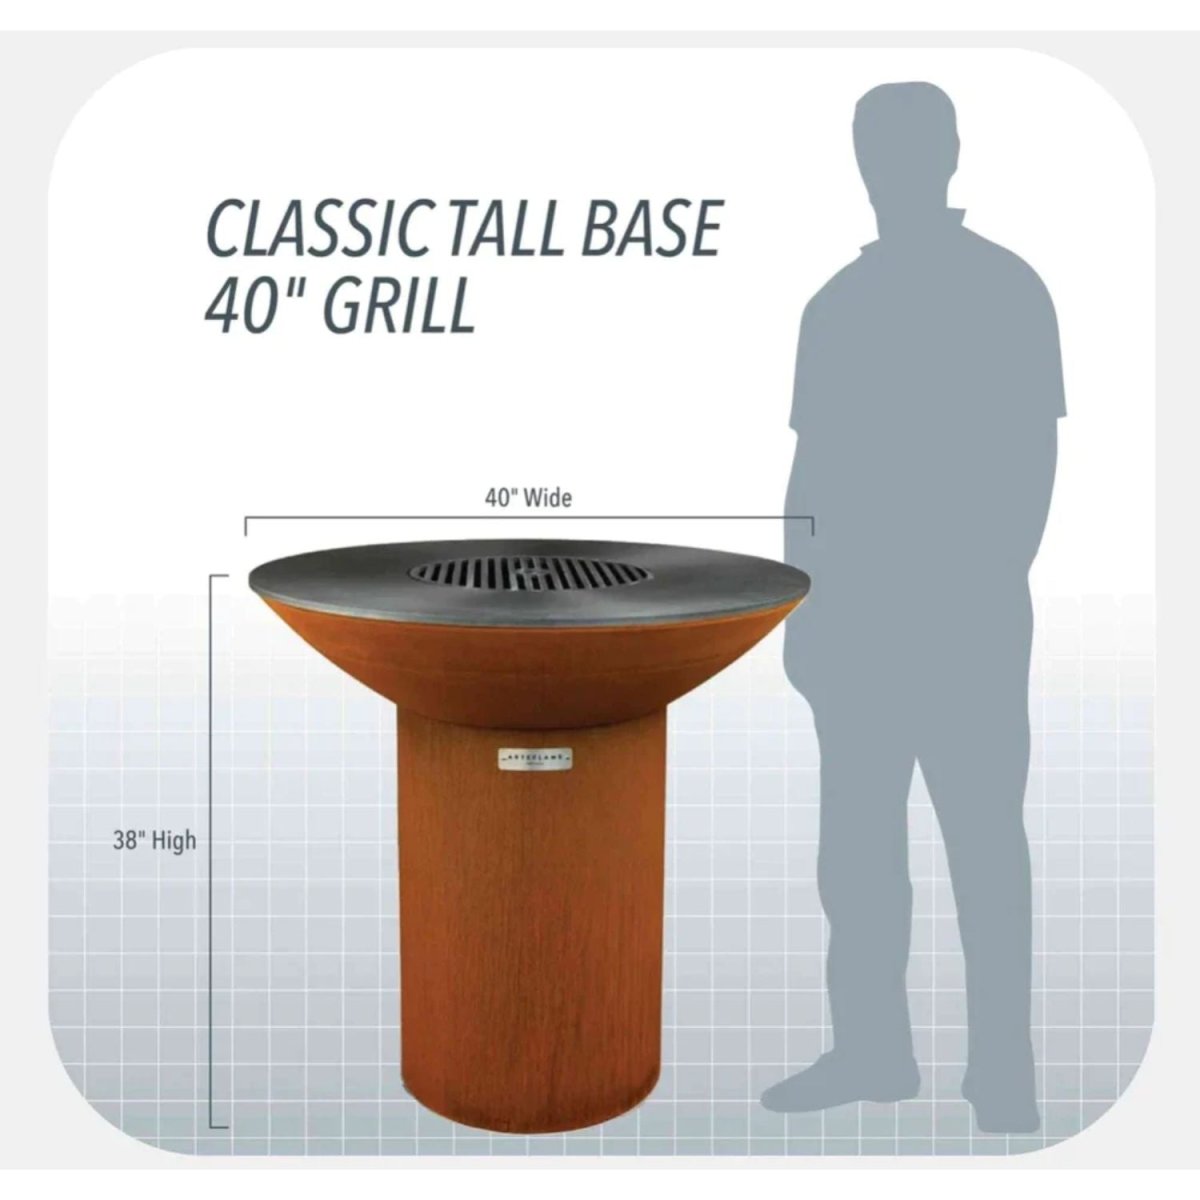 Arteflame Classic 40" Grill Black Label - Tall Round Base - Upper Livin